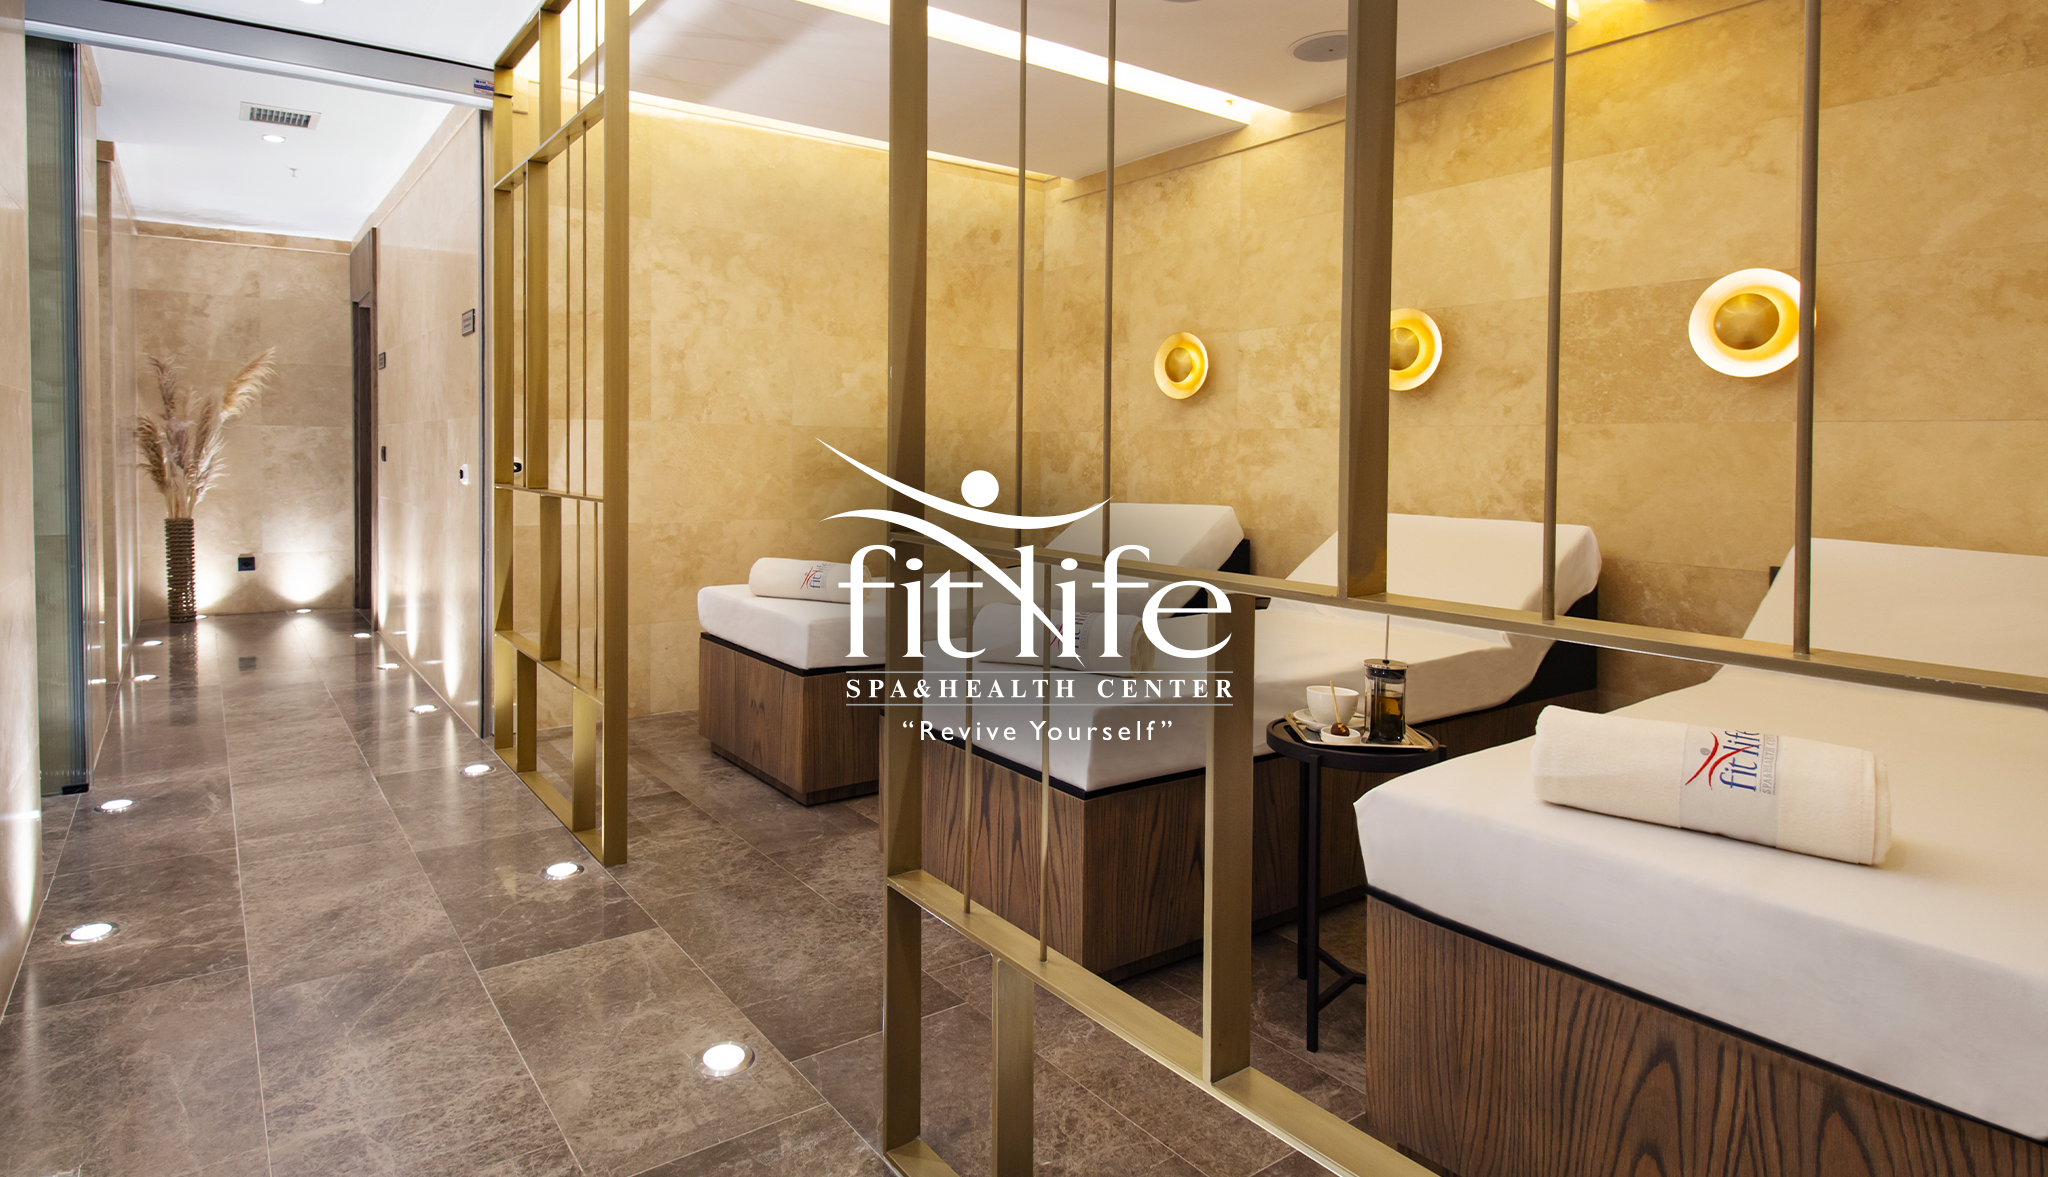 FIT LIFE SPA